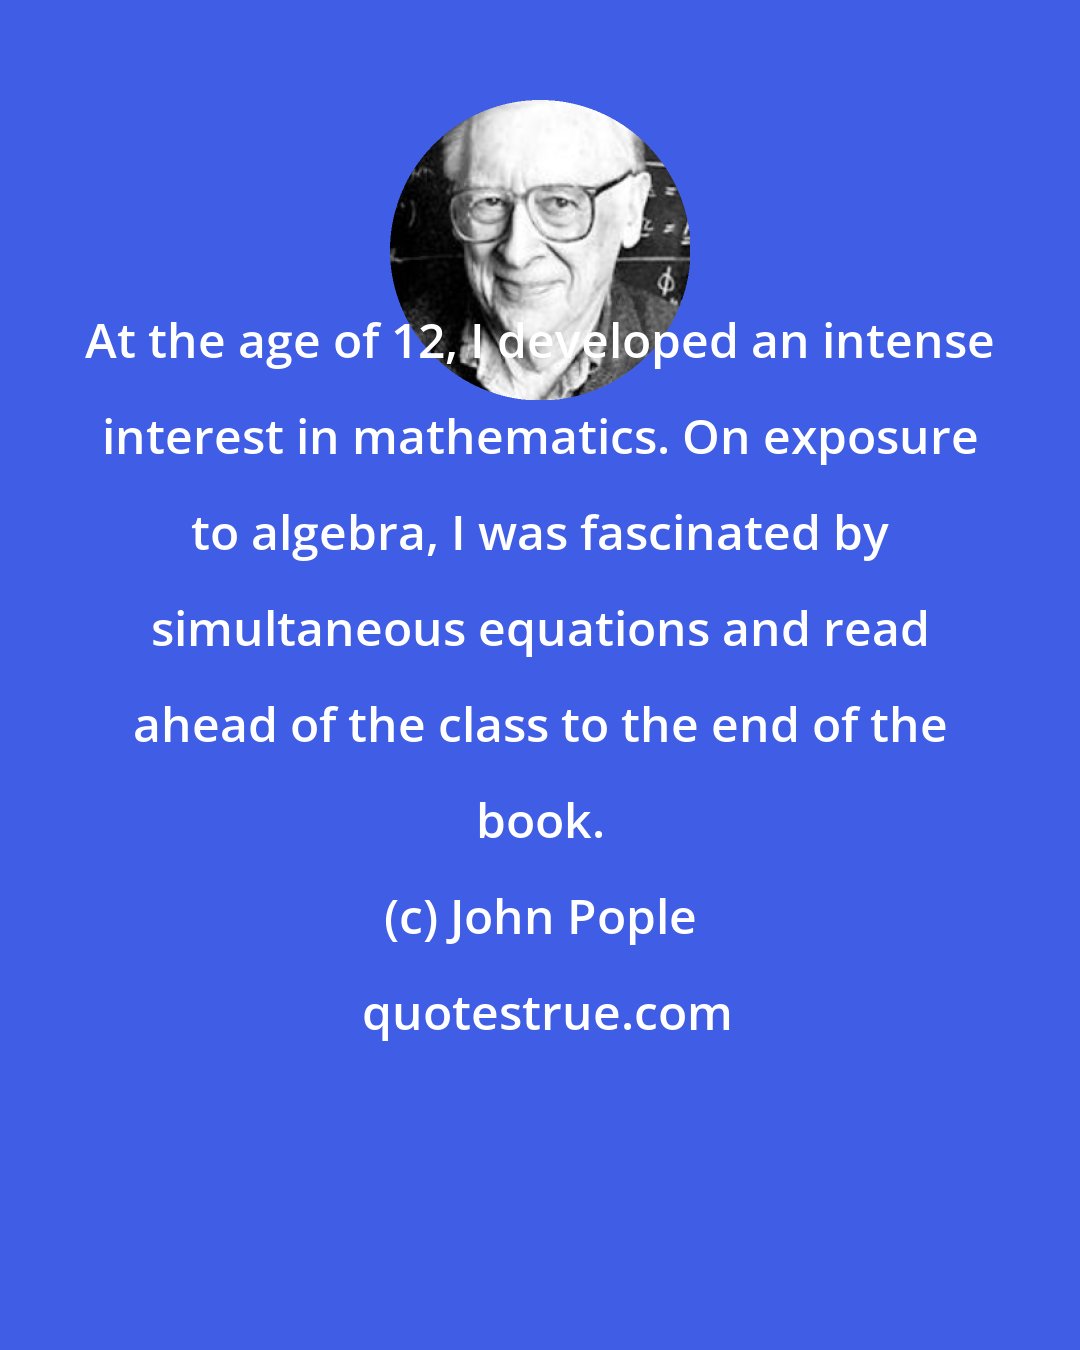 John Pople: At the age of 12, I developed an intense interest in mathematics. On exposure to algebra, I was fascinated by simultaneous equations and read ahead of the class to the end of the book.